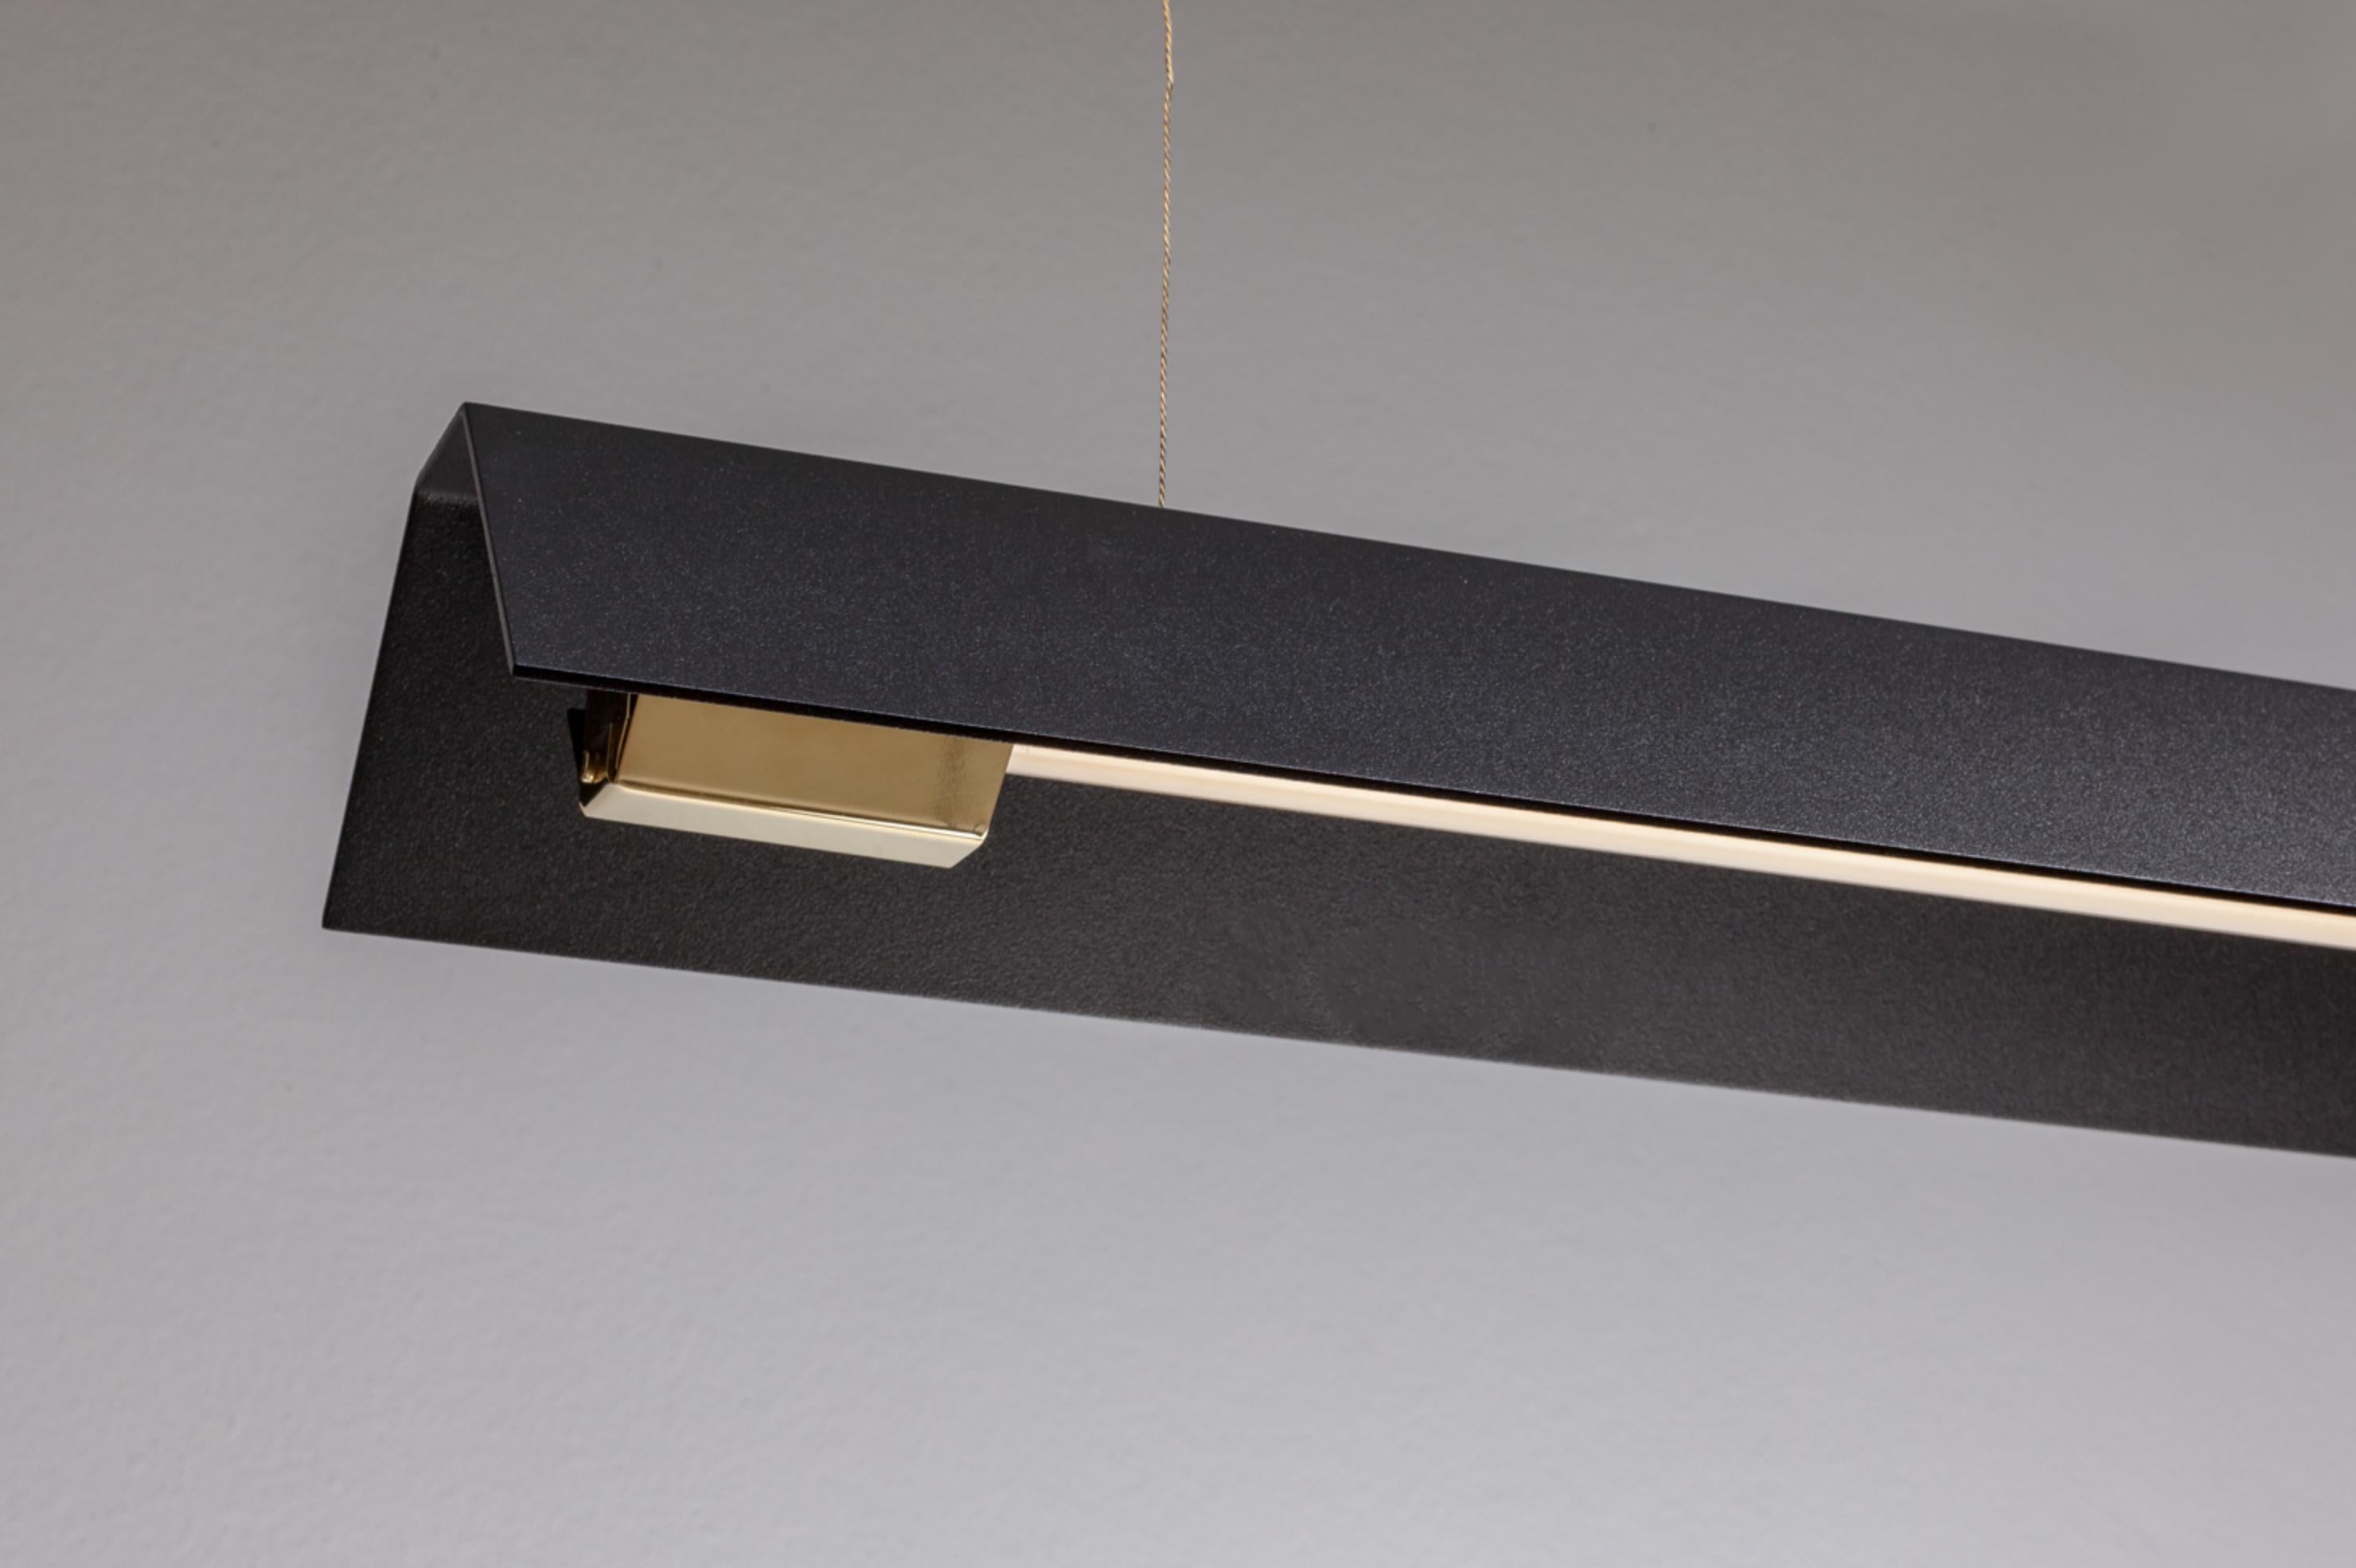 Medium misalliance ex jet black suspended light by Lexavala.
Dimensions: D 16 x W 100 x H 8 cm.
Materials: powder coated shade with details made of brass or stainless steel.

There are two lenghts of socket covers, extending over the LED. Two